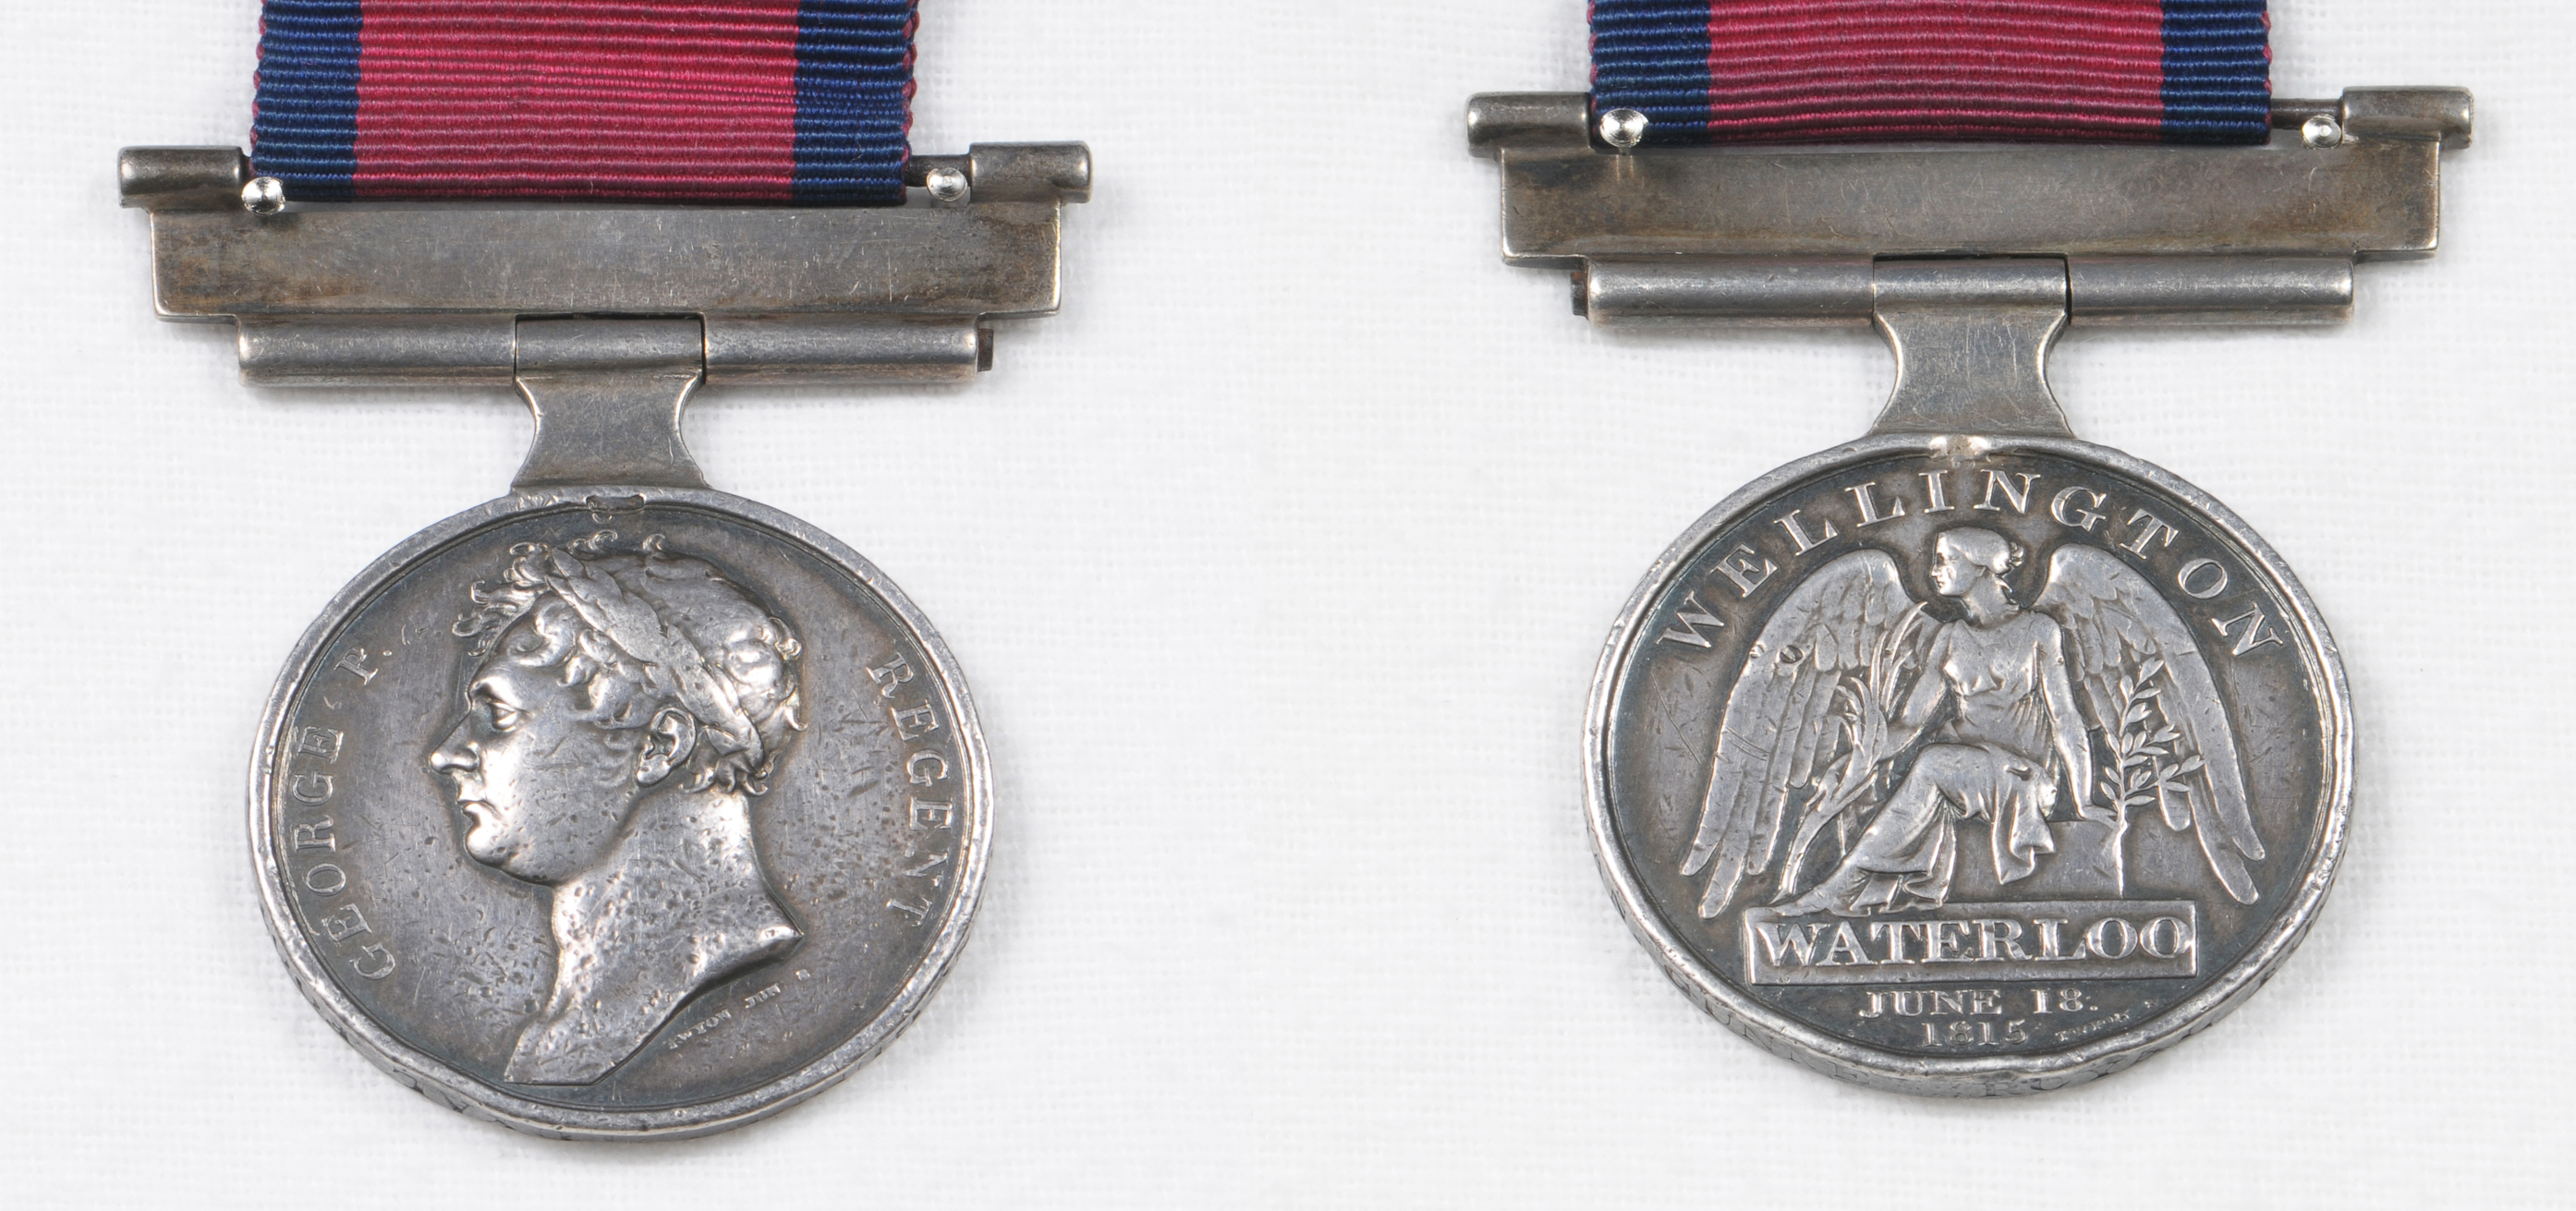 A Waterloo medal awarded to Joseph Redman gunner of the Royal foot artillery, with later white metal